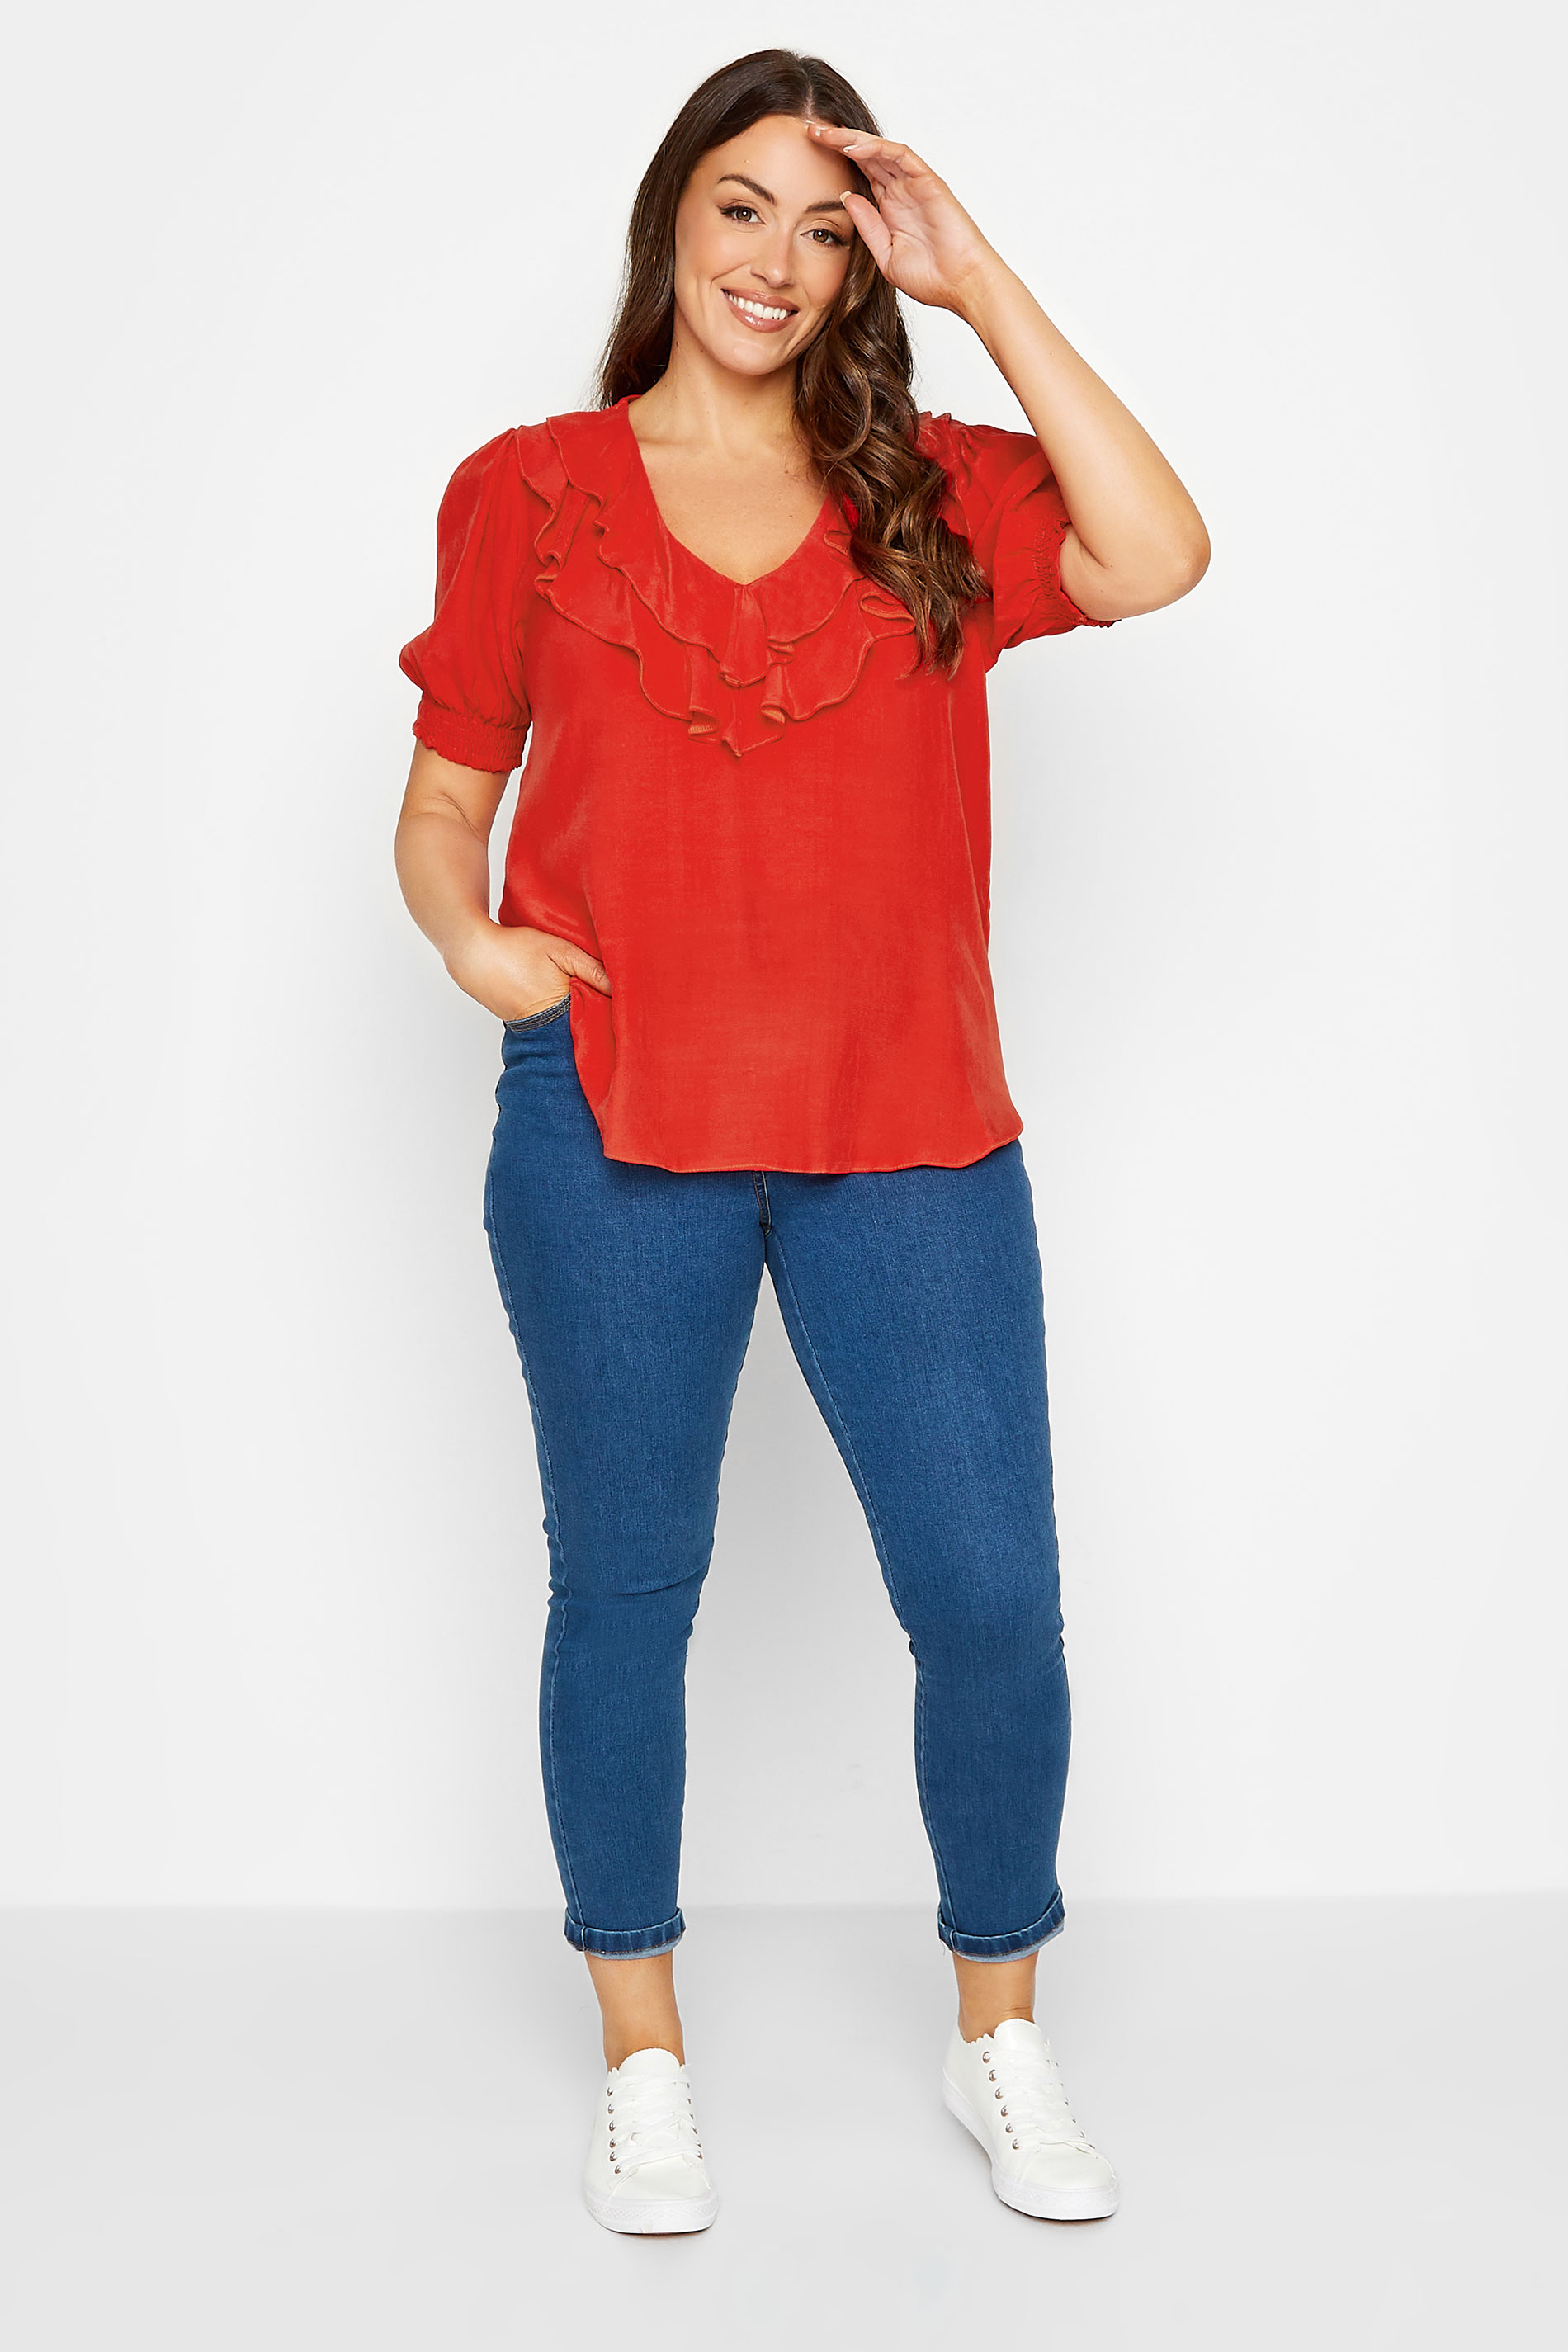 M&Co Red Frill Front Blouse | M&Co 2